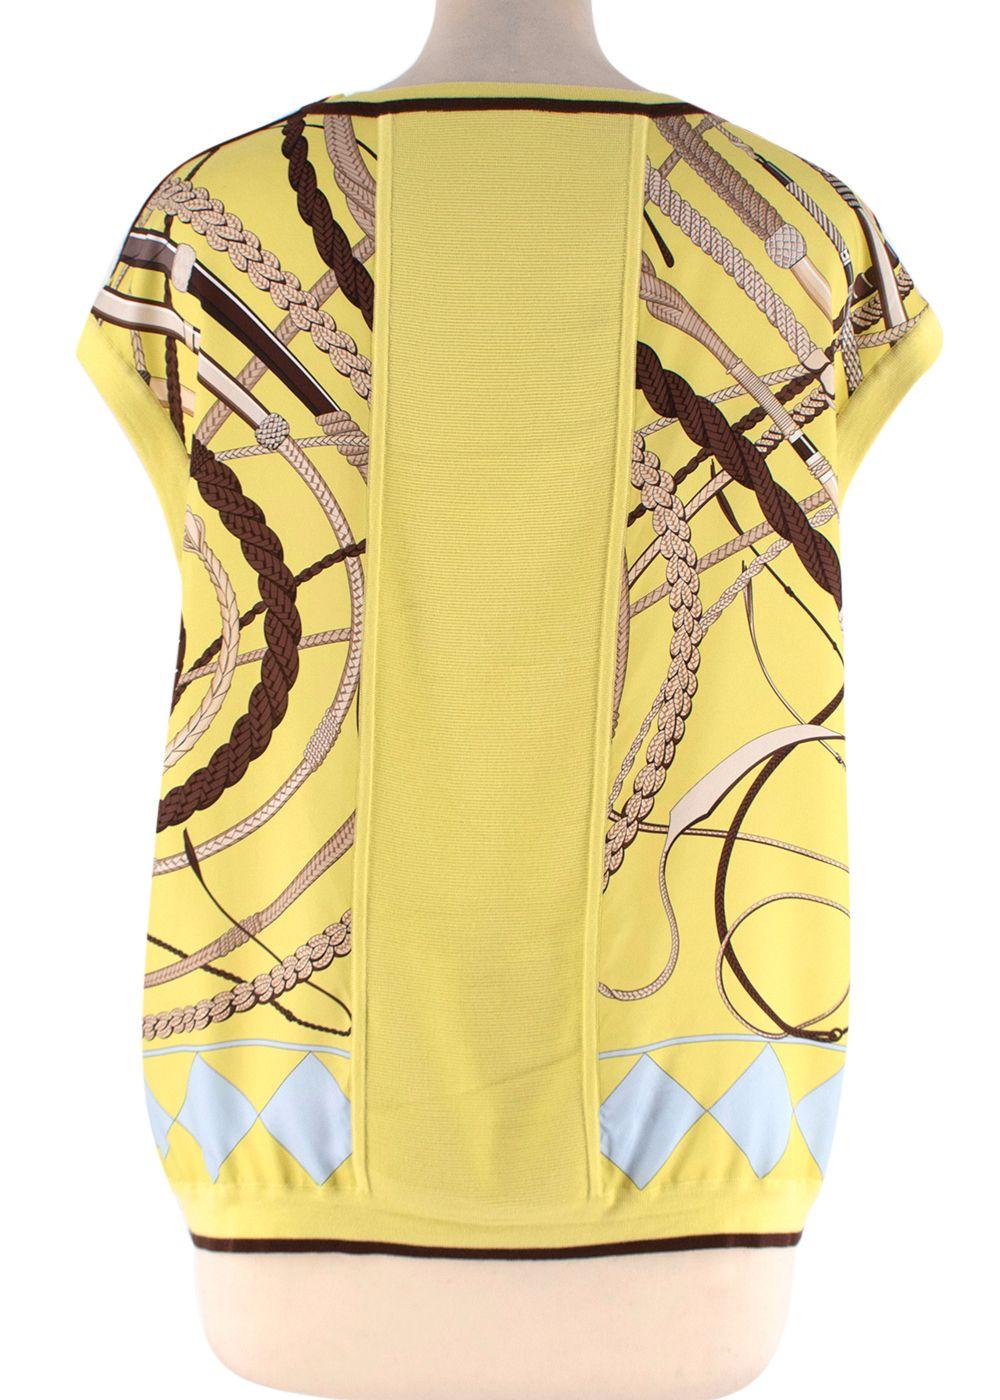 Hermes Yellow & Blue Equestrian Print Silk & Knit Vest

- Equestrian silk scarf pattern 
- Knitted collar, armholes, and hemline
- Insert knitted back panel
- Silver-tone metal exposed zip on the right shoulder

Item measured on flat surface, seam